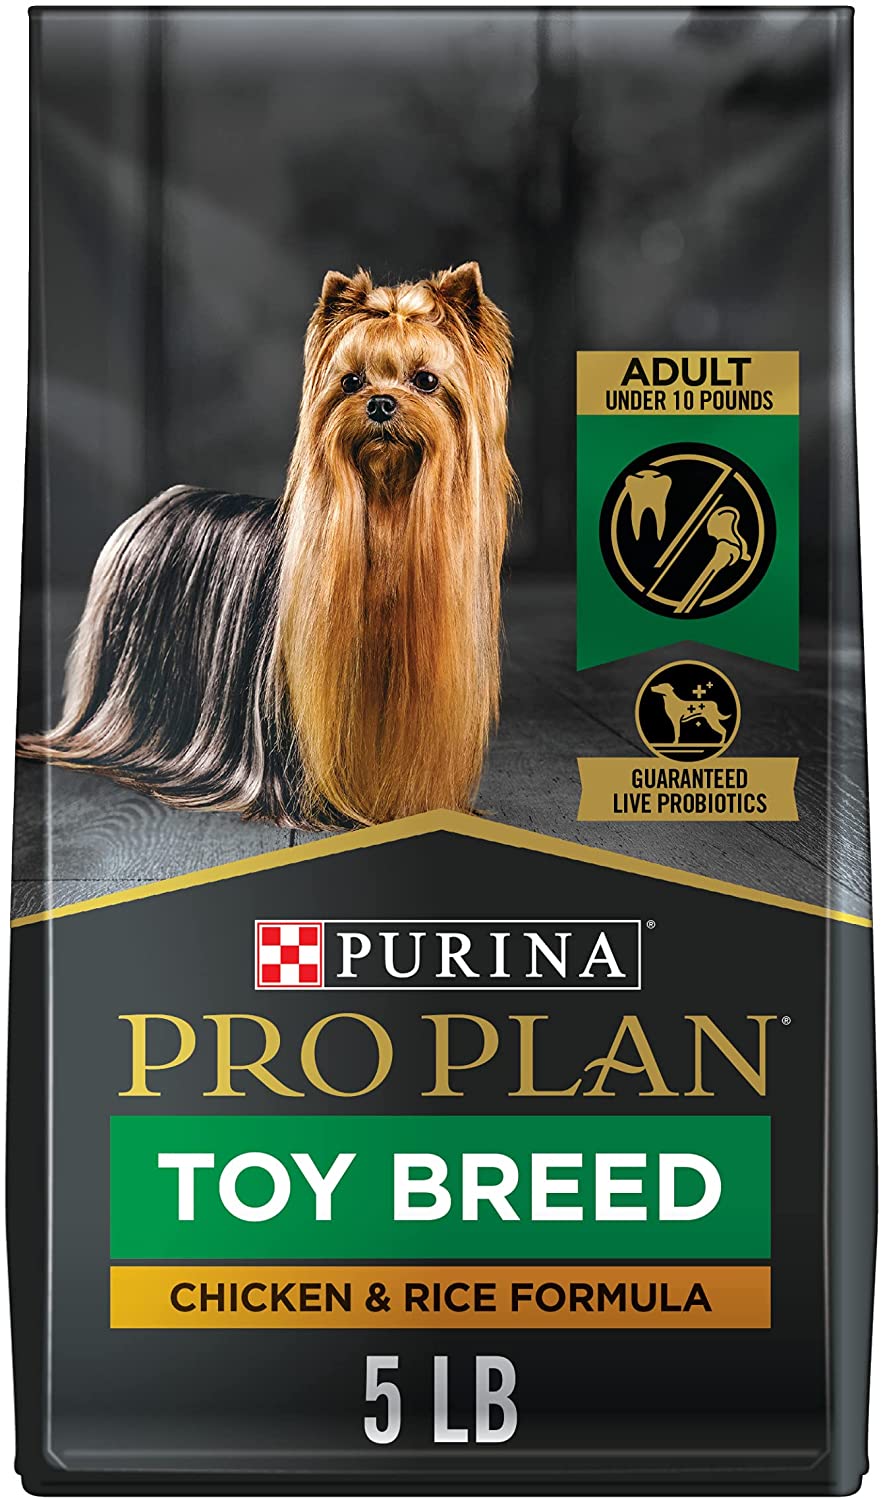 https://bigbigmart.com/wp-content/uploads/2022/06/Purina-Pro-Plan-Toy-Breed-Dry-Dog-Food-With-Probiotics-for-Dogs-Chicken-and-Rice-Formula-5-lb.-Bag.jpeg